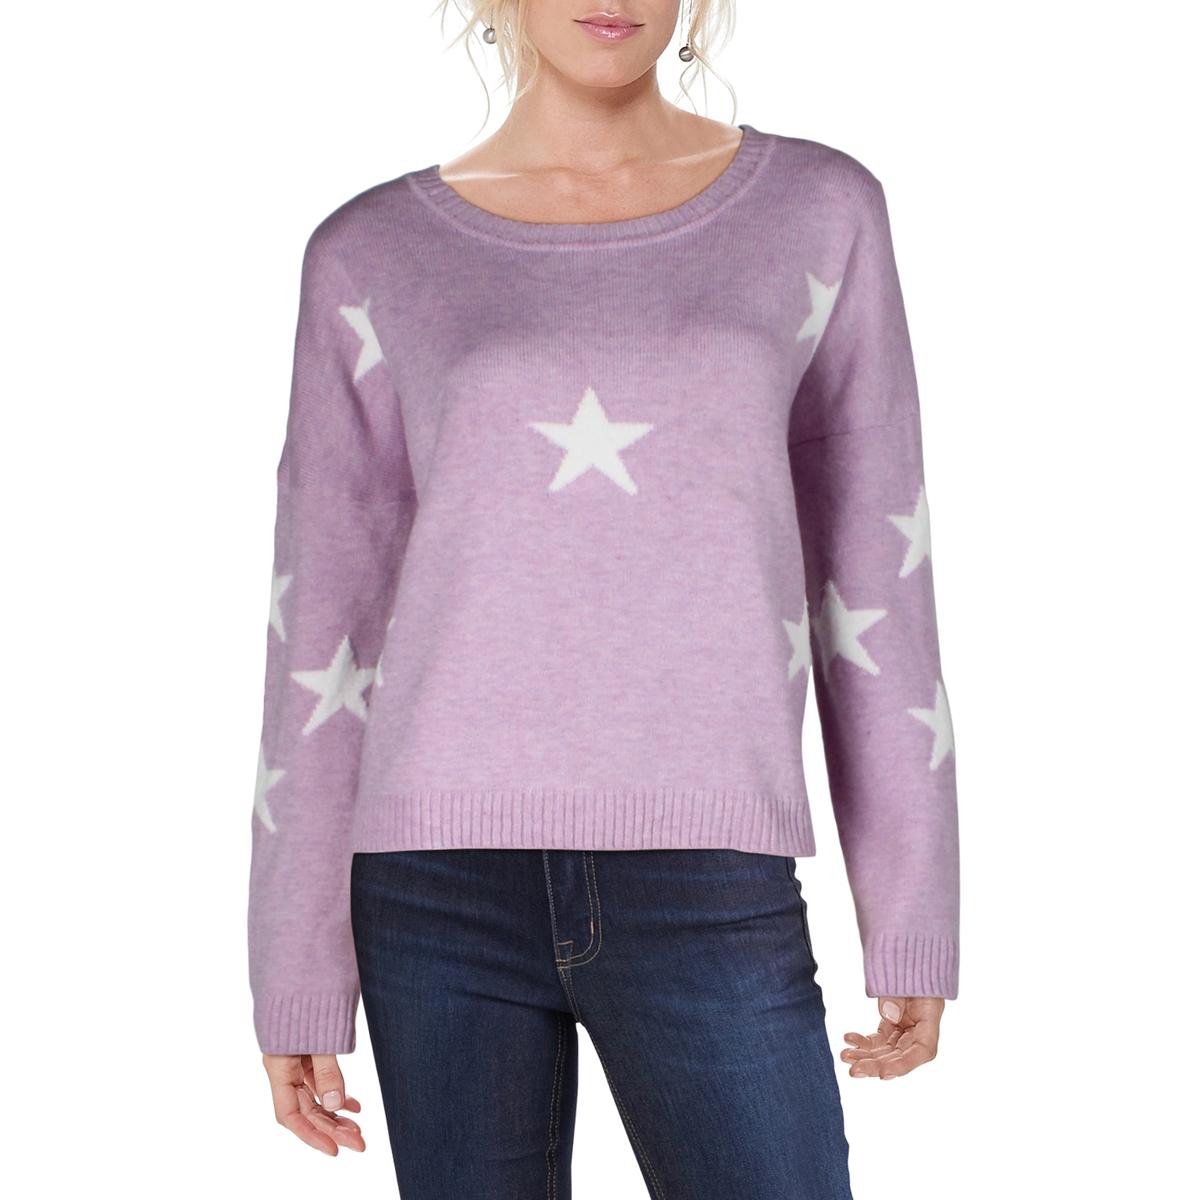 Theo & Spence Womens Printed Pull Over Shirt Crewneck Sweater Top BHFO ...